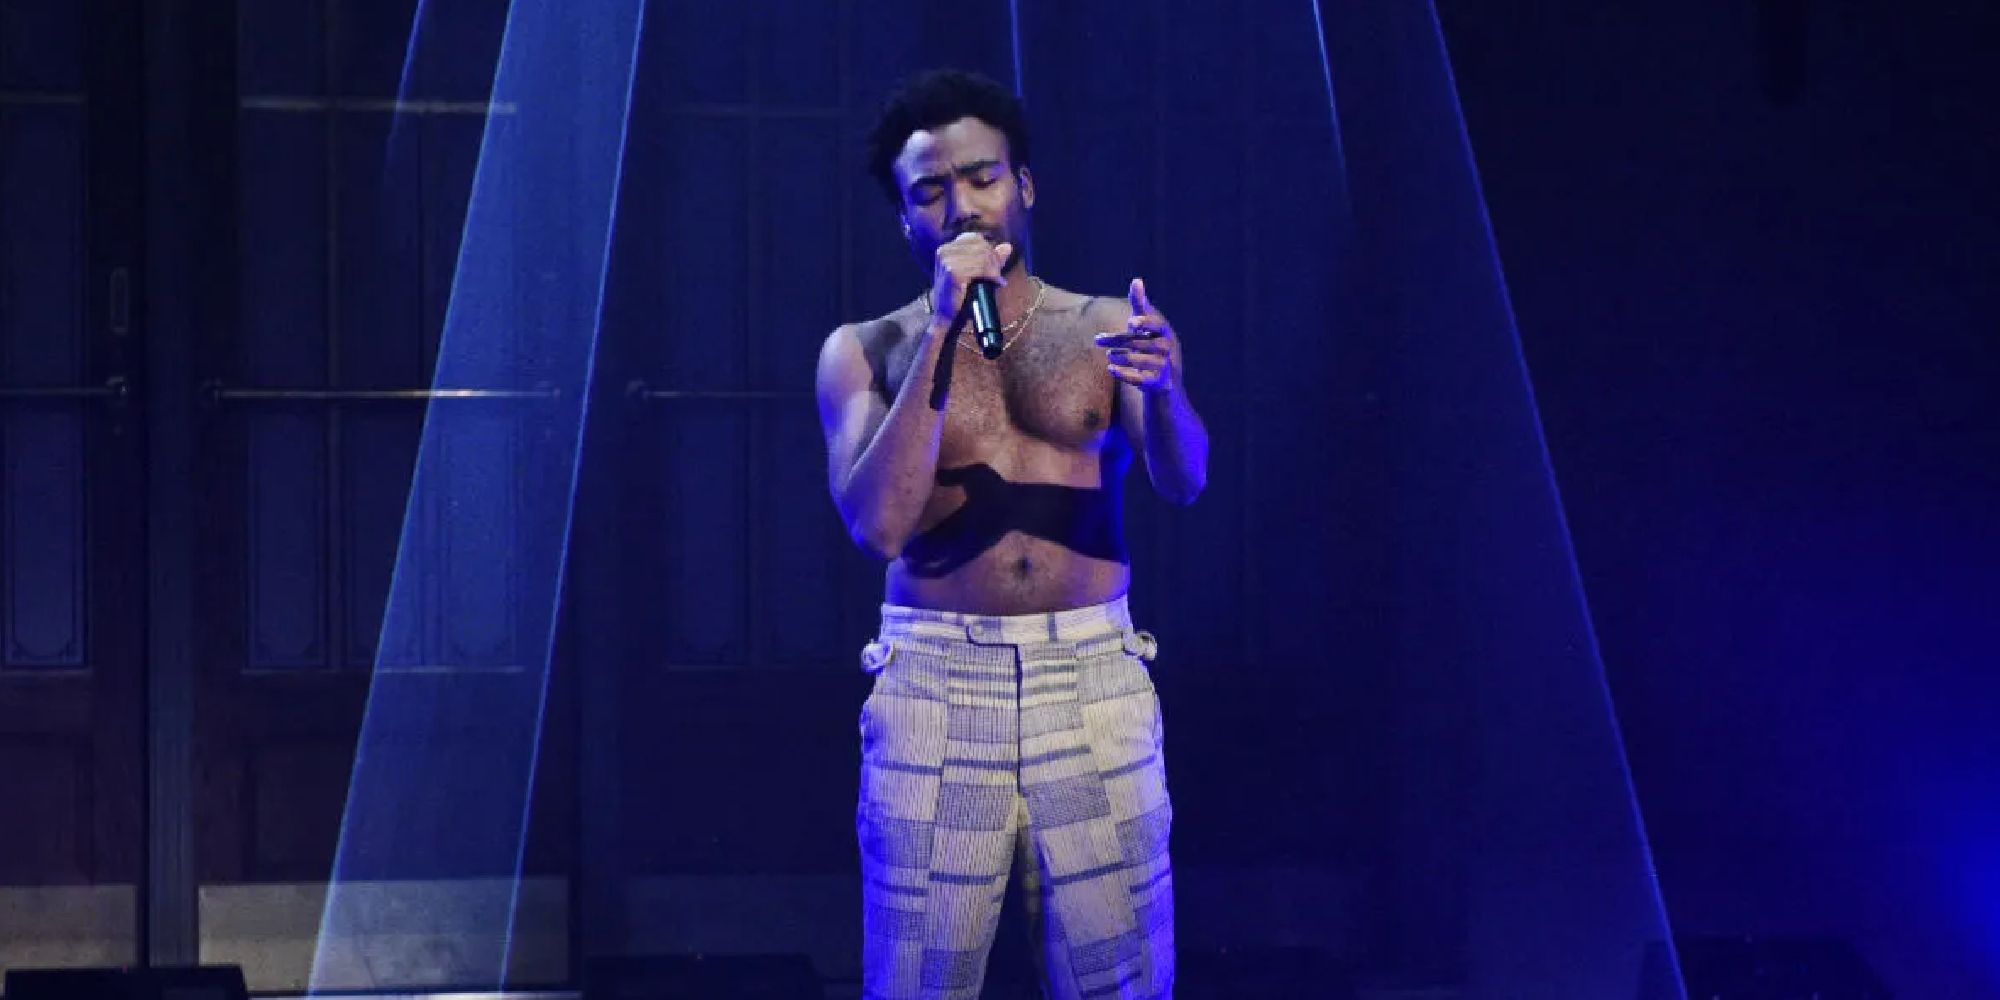 Donald Glover performing "This Is America" as Childish Gambino in 2018